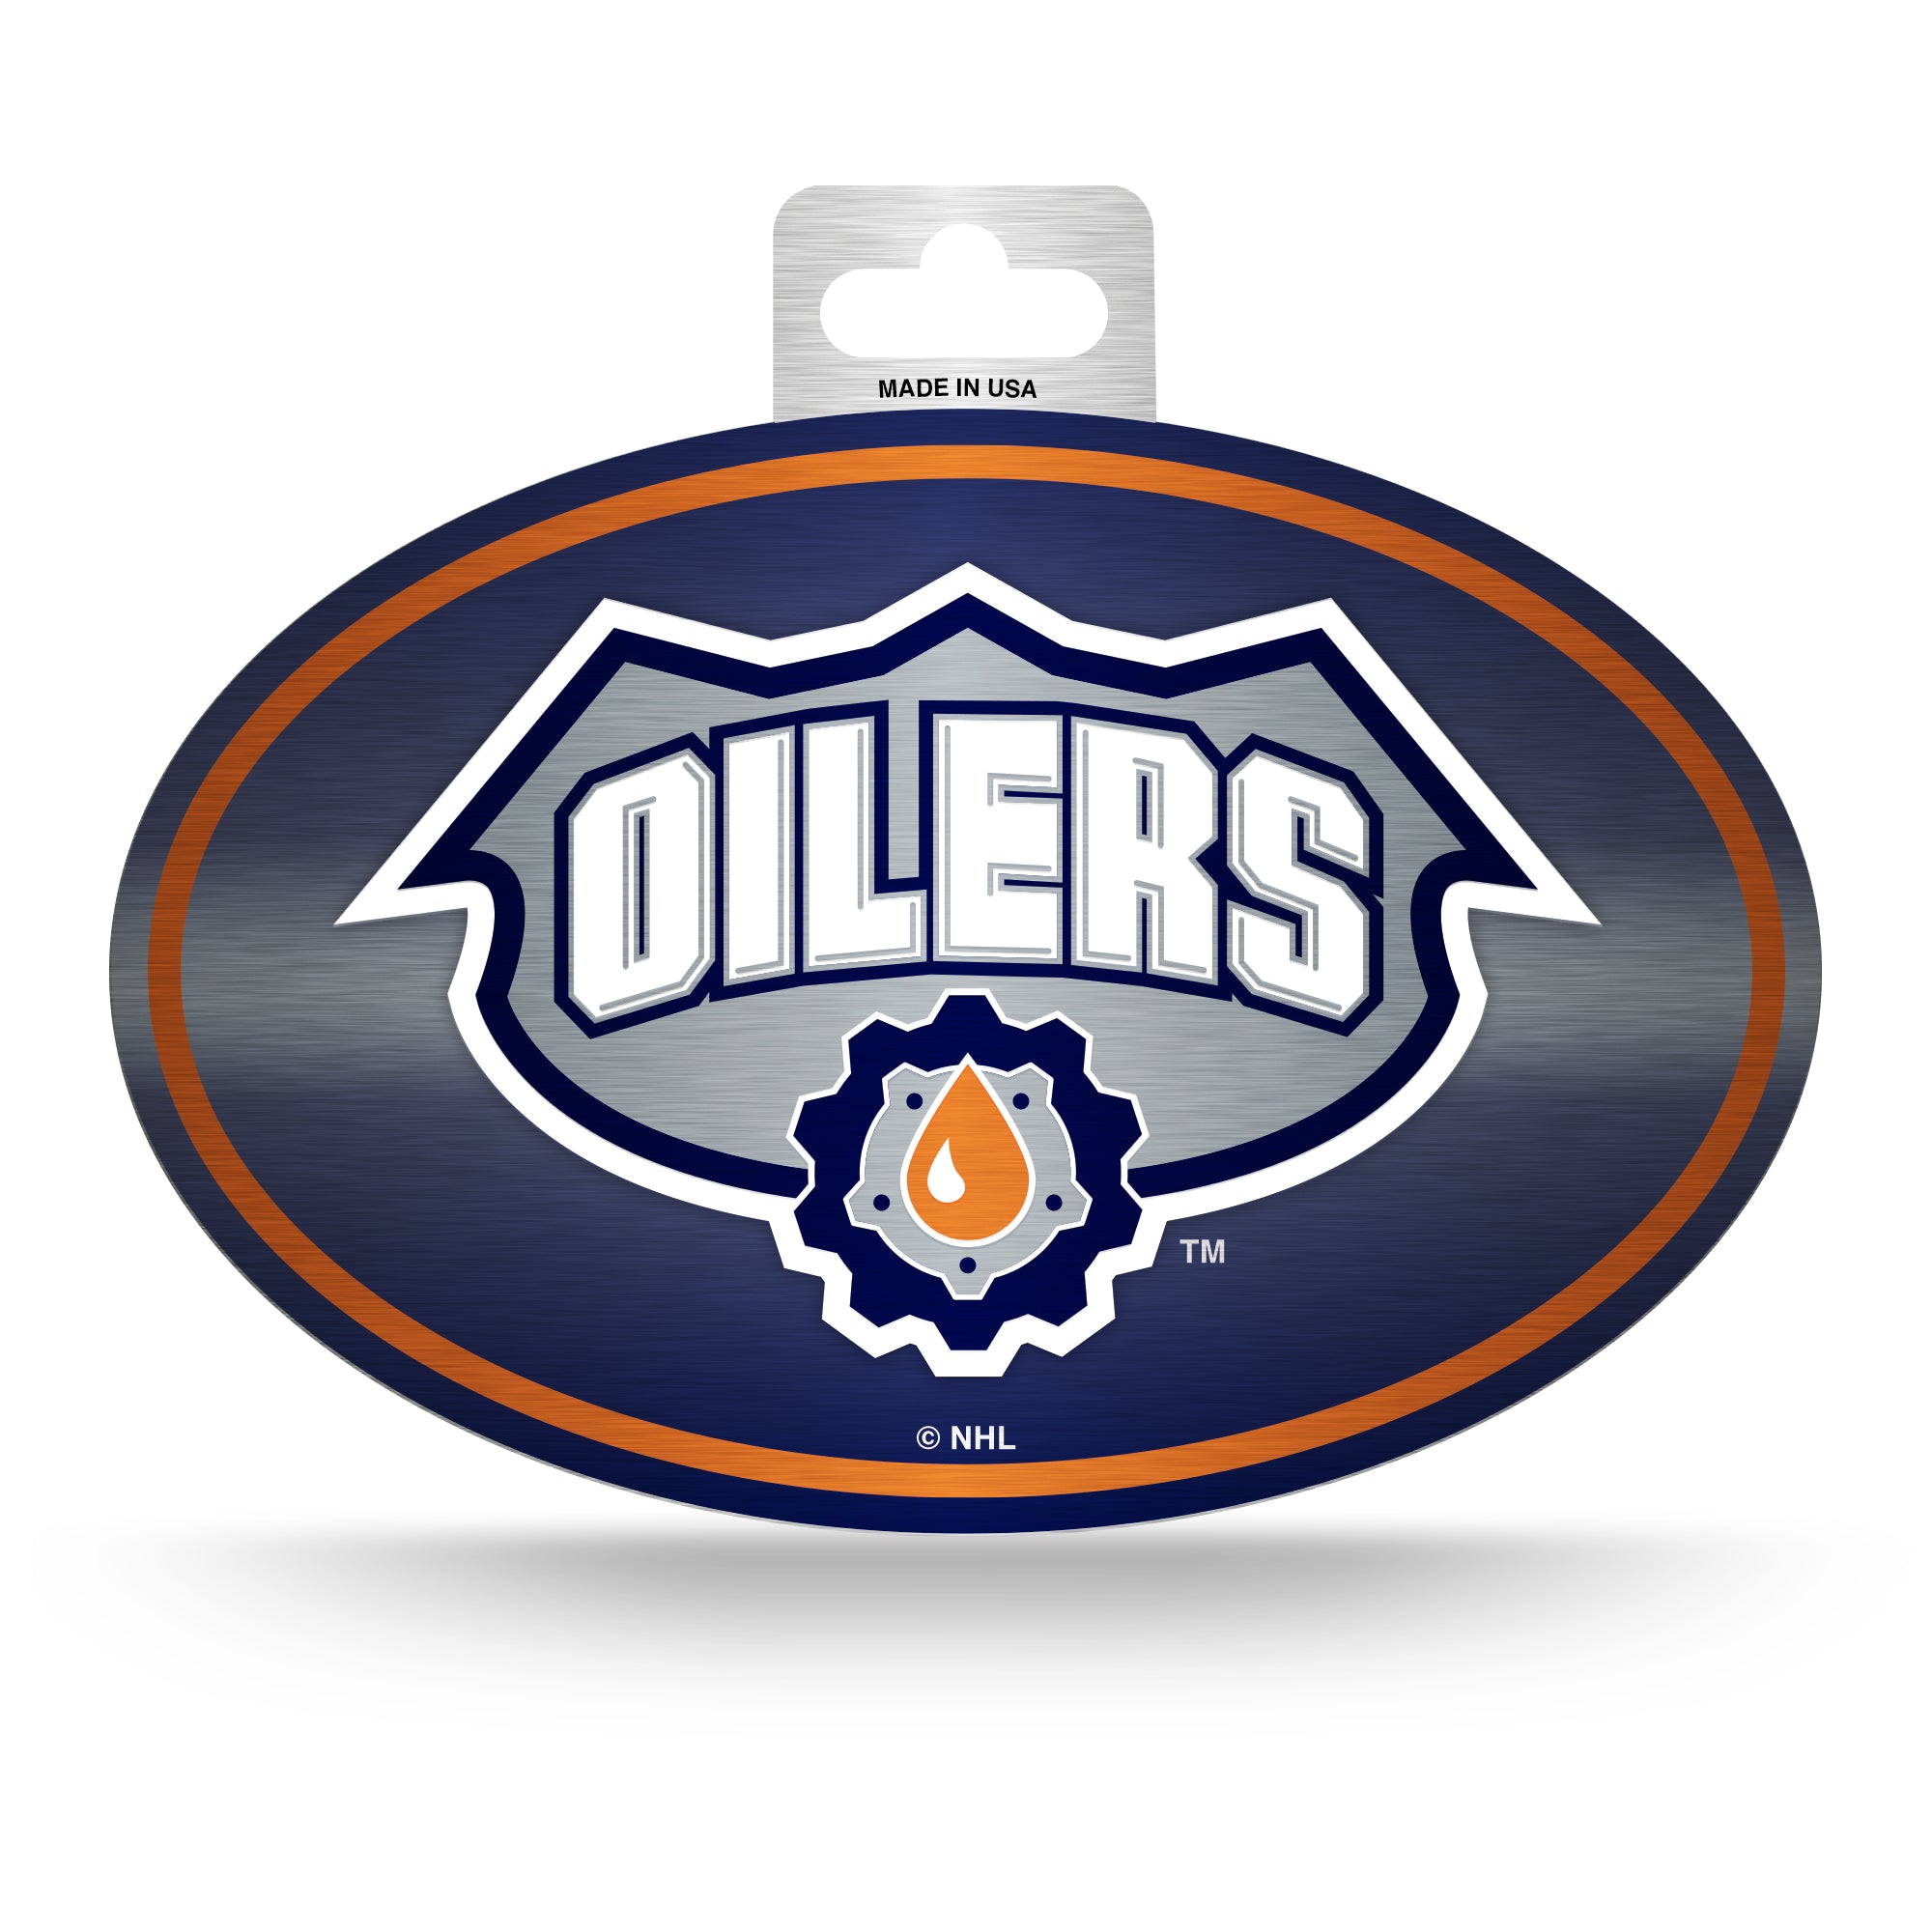 Oilers reveal new reverse retro jersey featuring Oil Gear logo (PHOTOS)